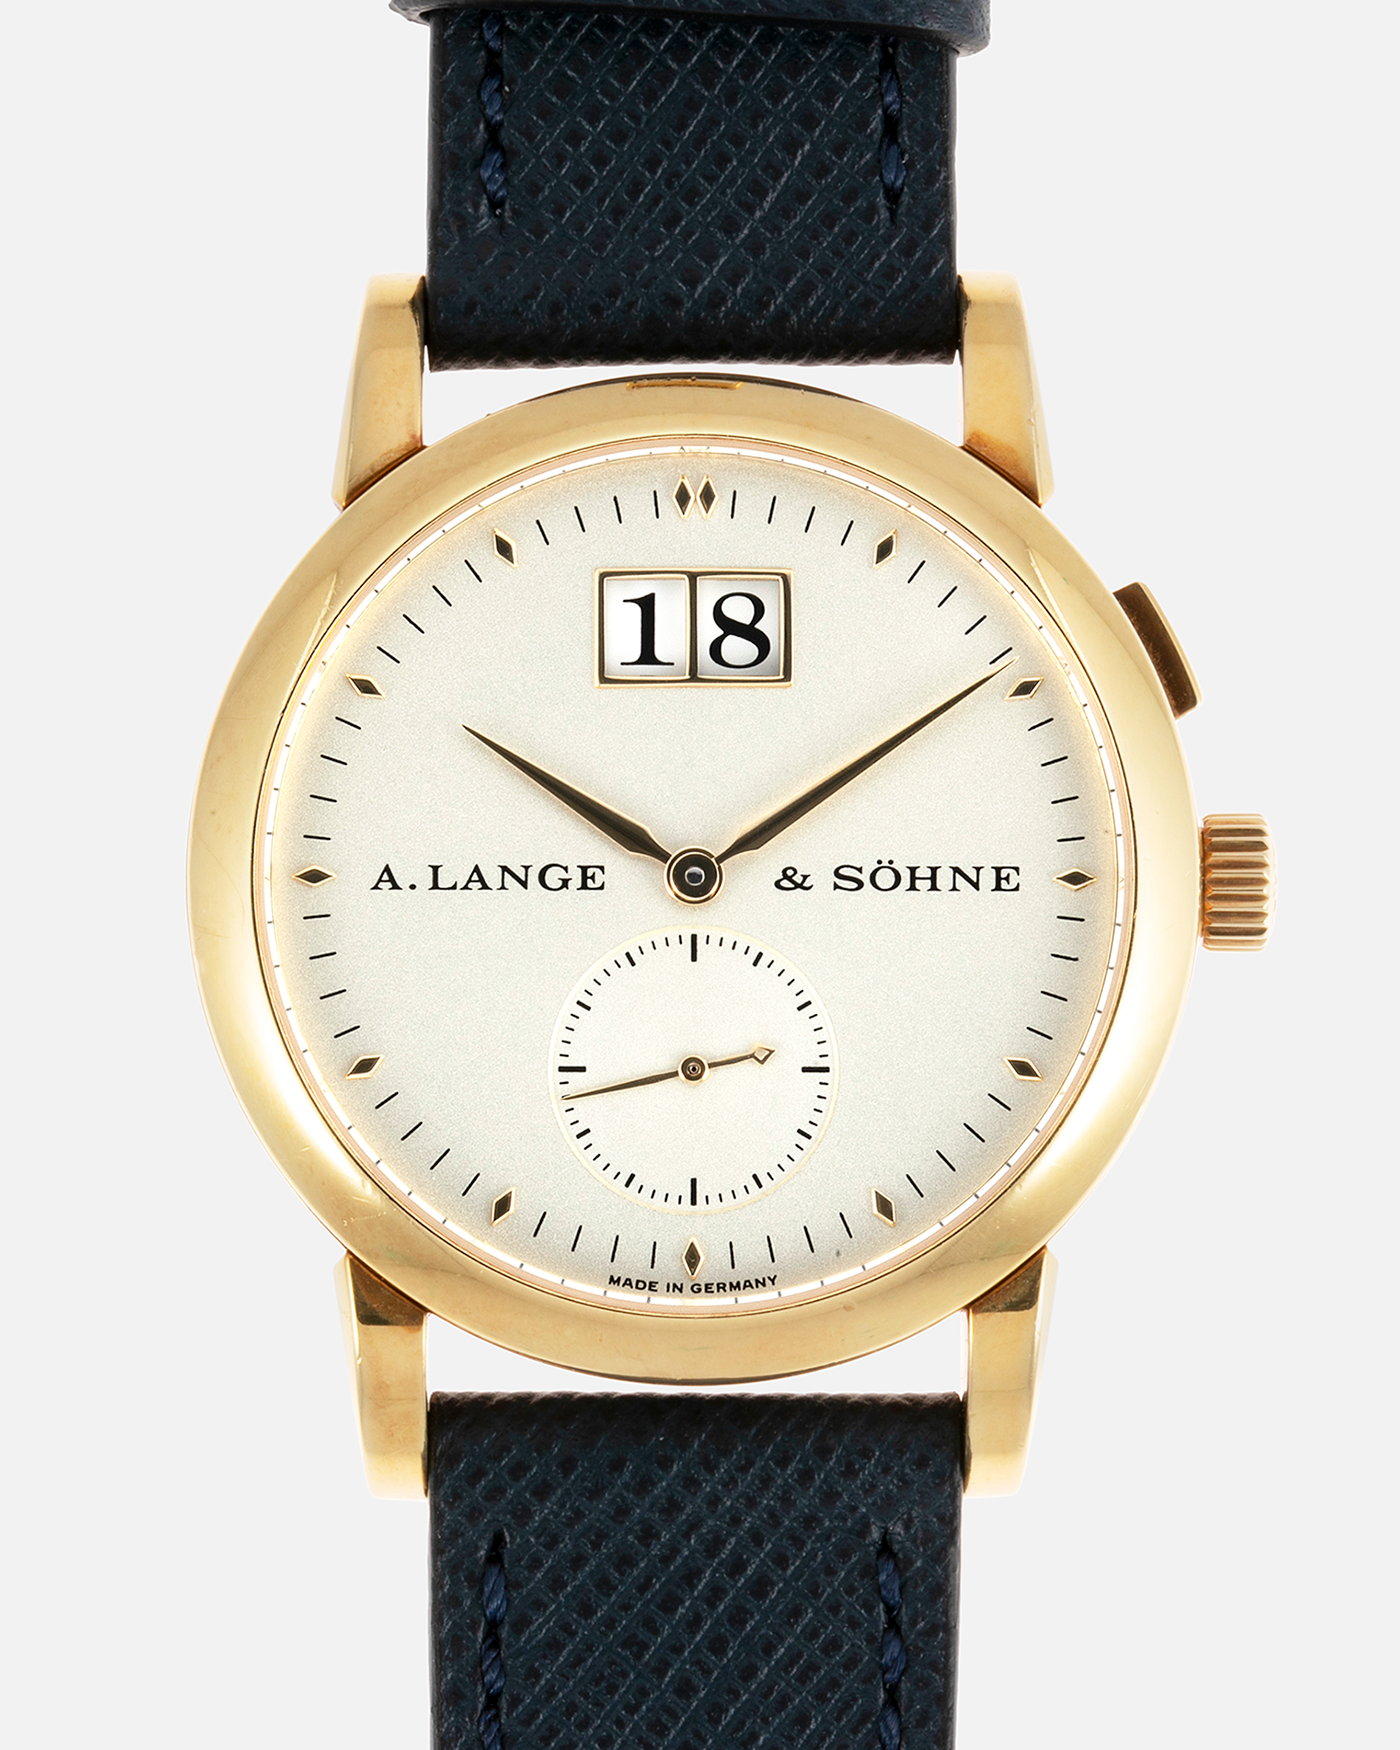 Brand: A. Lange & Sohne Year: Between 1994 - 1996 Model: Saxonia   Reference Number: 102.011 Material: 18-carat Yellow Gold Movement: Cal. L911.3, Manual-Wind Case Diameter: 34mm x 9.1mm Bracelet/Strap: Navy Blue Molequin Textured Leather and A. Lange & Sohne Black Alligator with Signed 18-carat Yellow Gold Tang Buckle